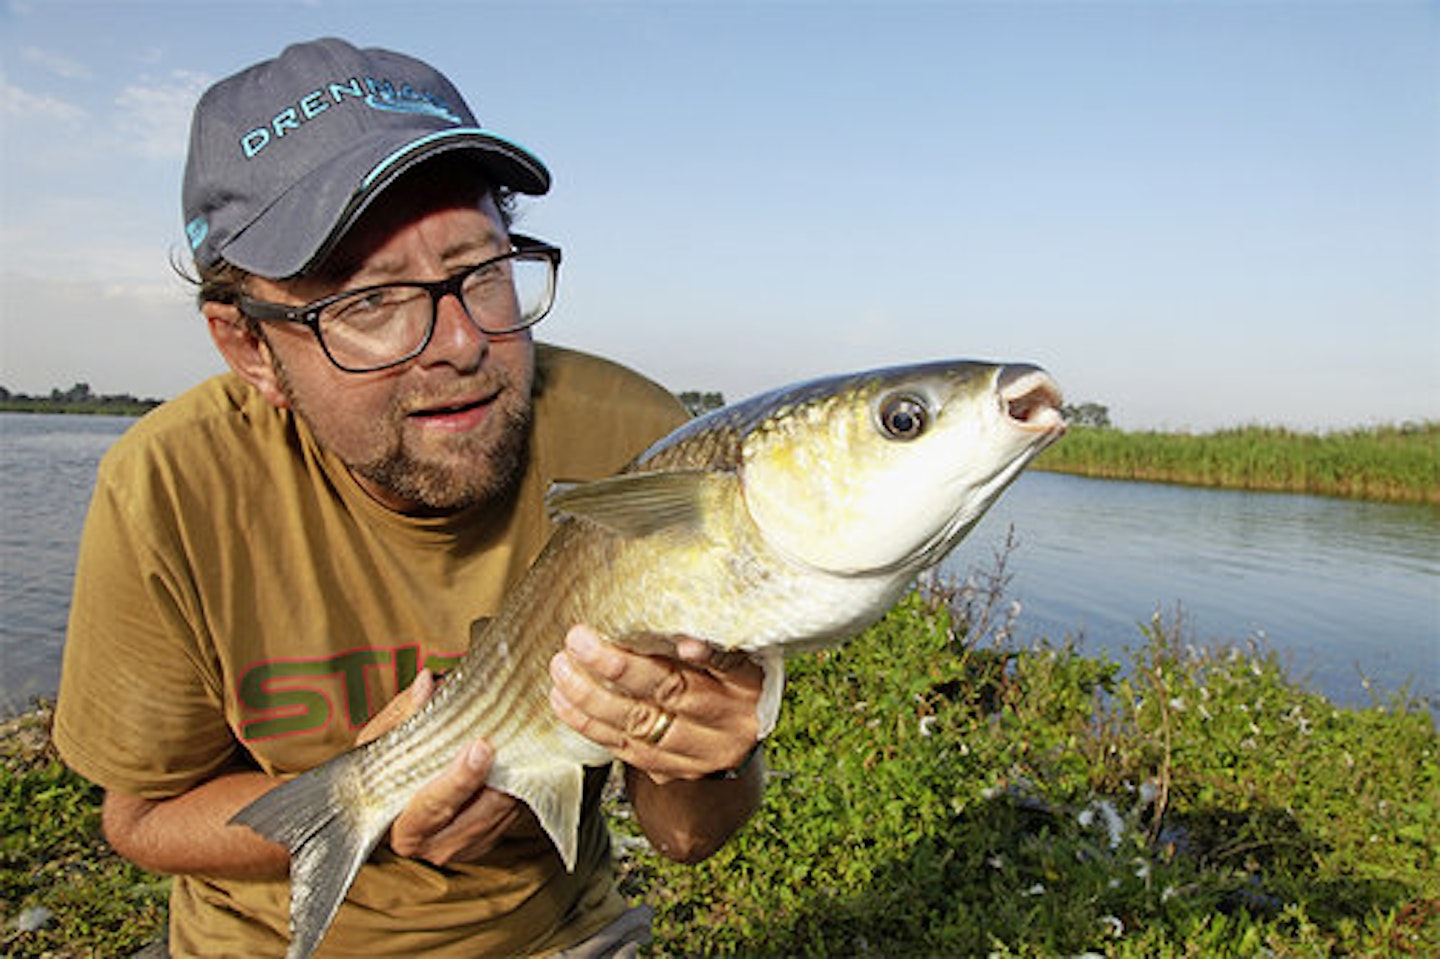 20 FISHING TIPS THAT WILL HELP YOU THINK MORE LIKE A FISH